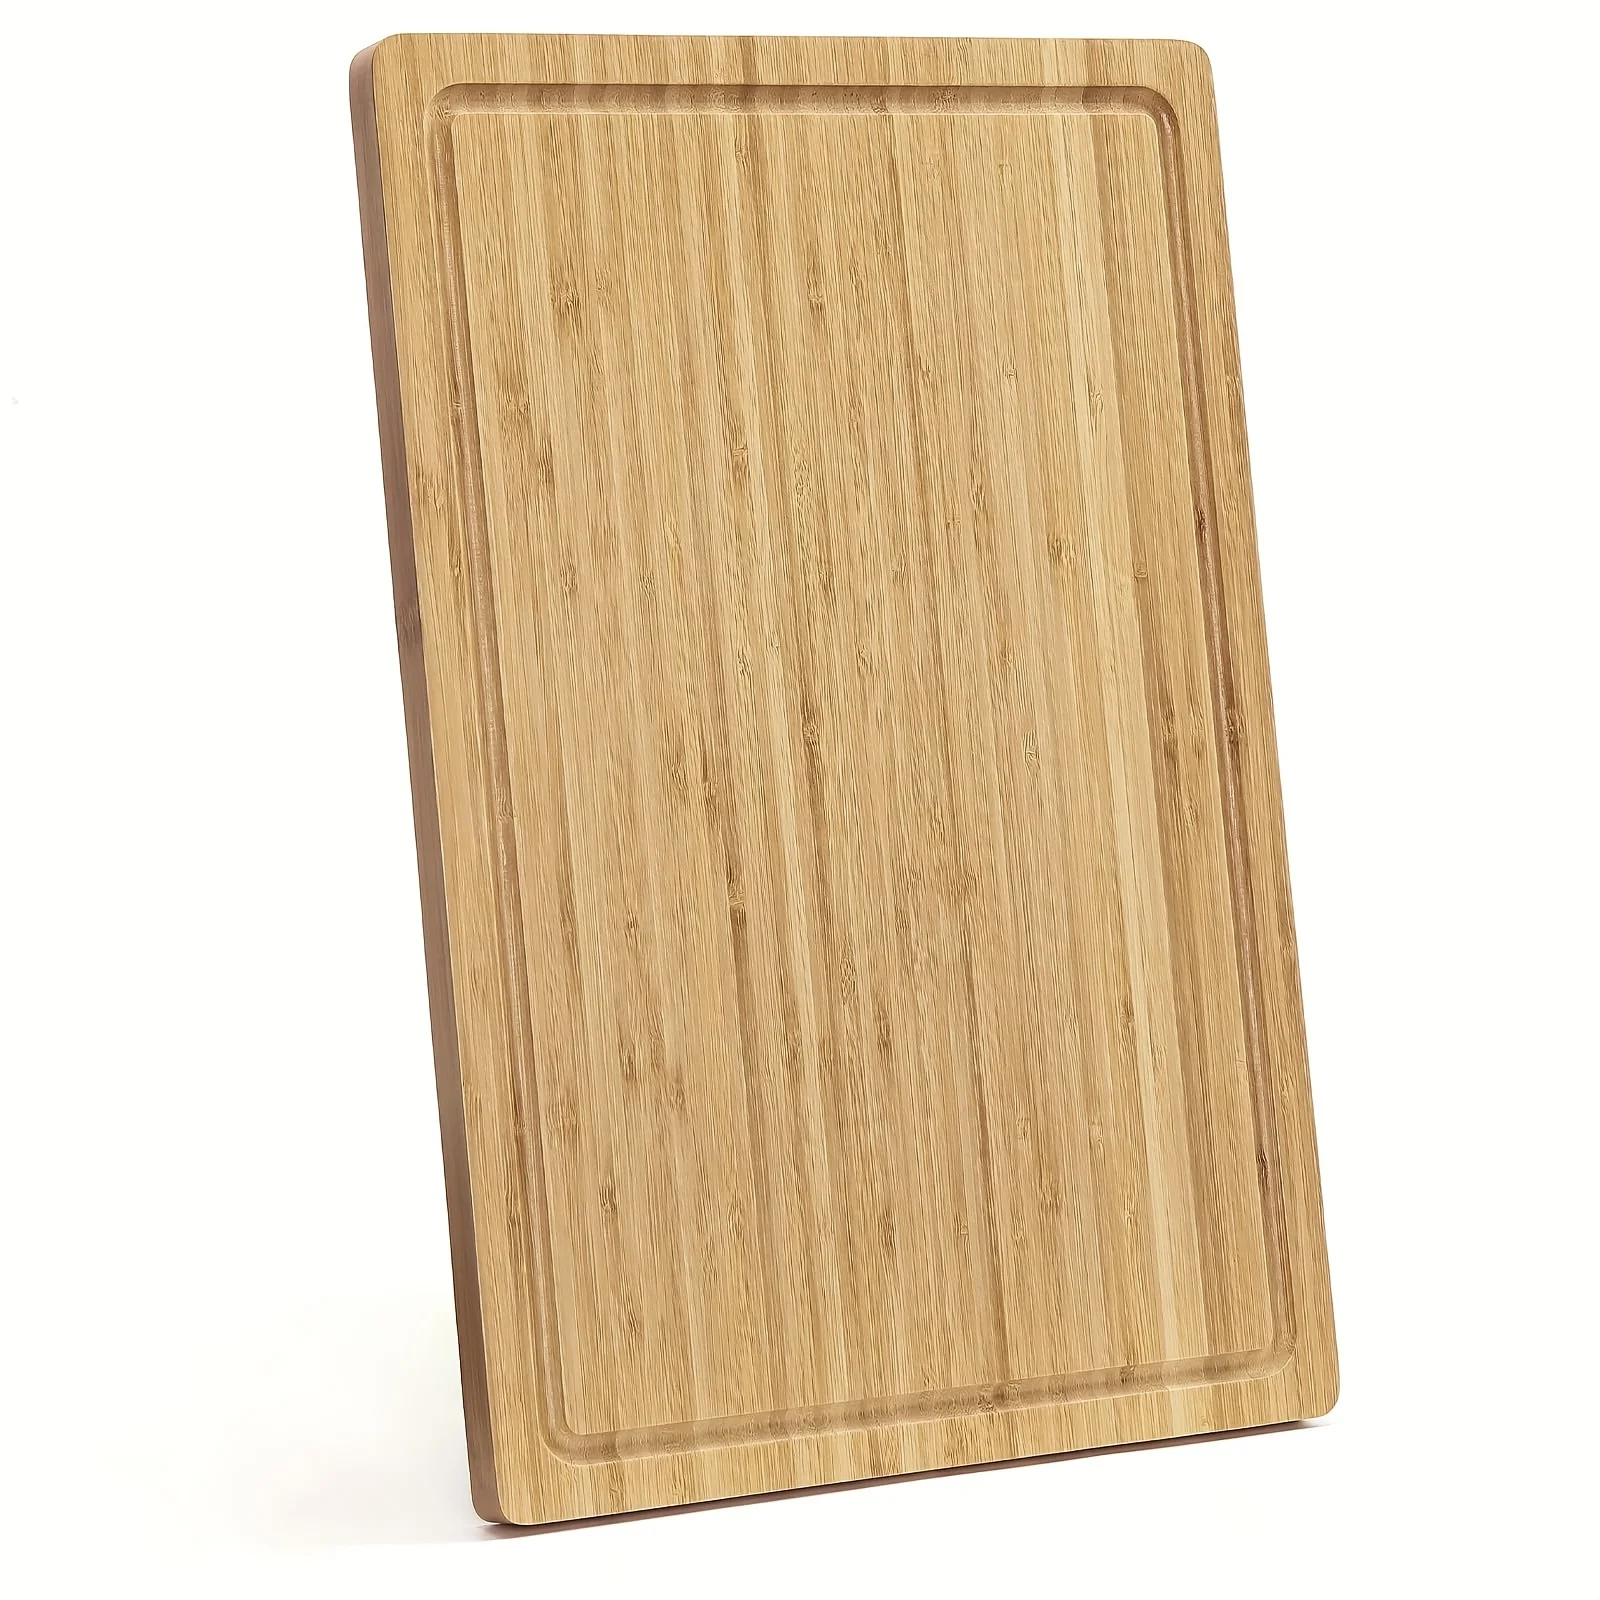 

36 x 24 Inch Bamboo Cutting Board for Kitchen, Wooden Butcher Block with Juice Groove & Handle, Large Wood Charcuterie Cheese Bo